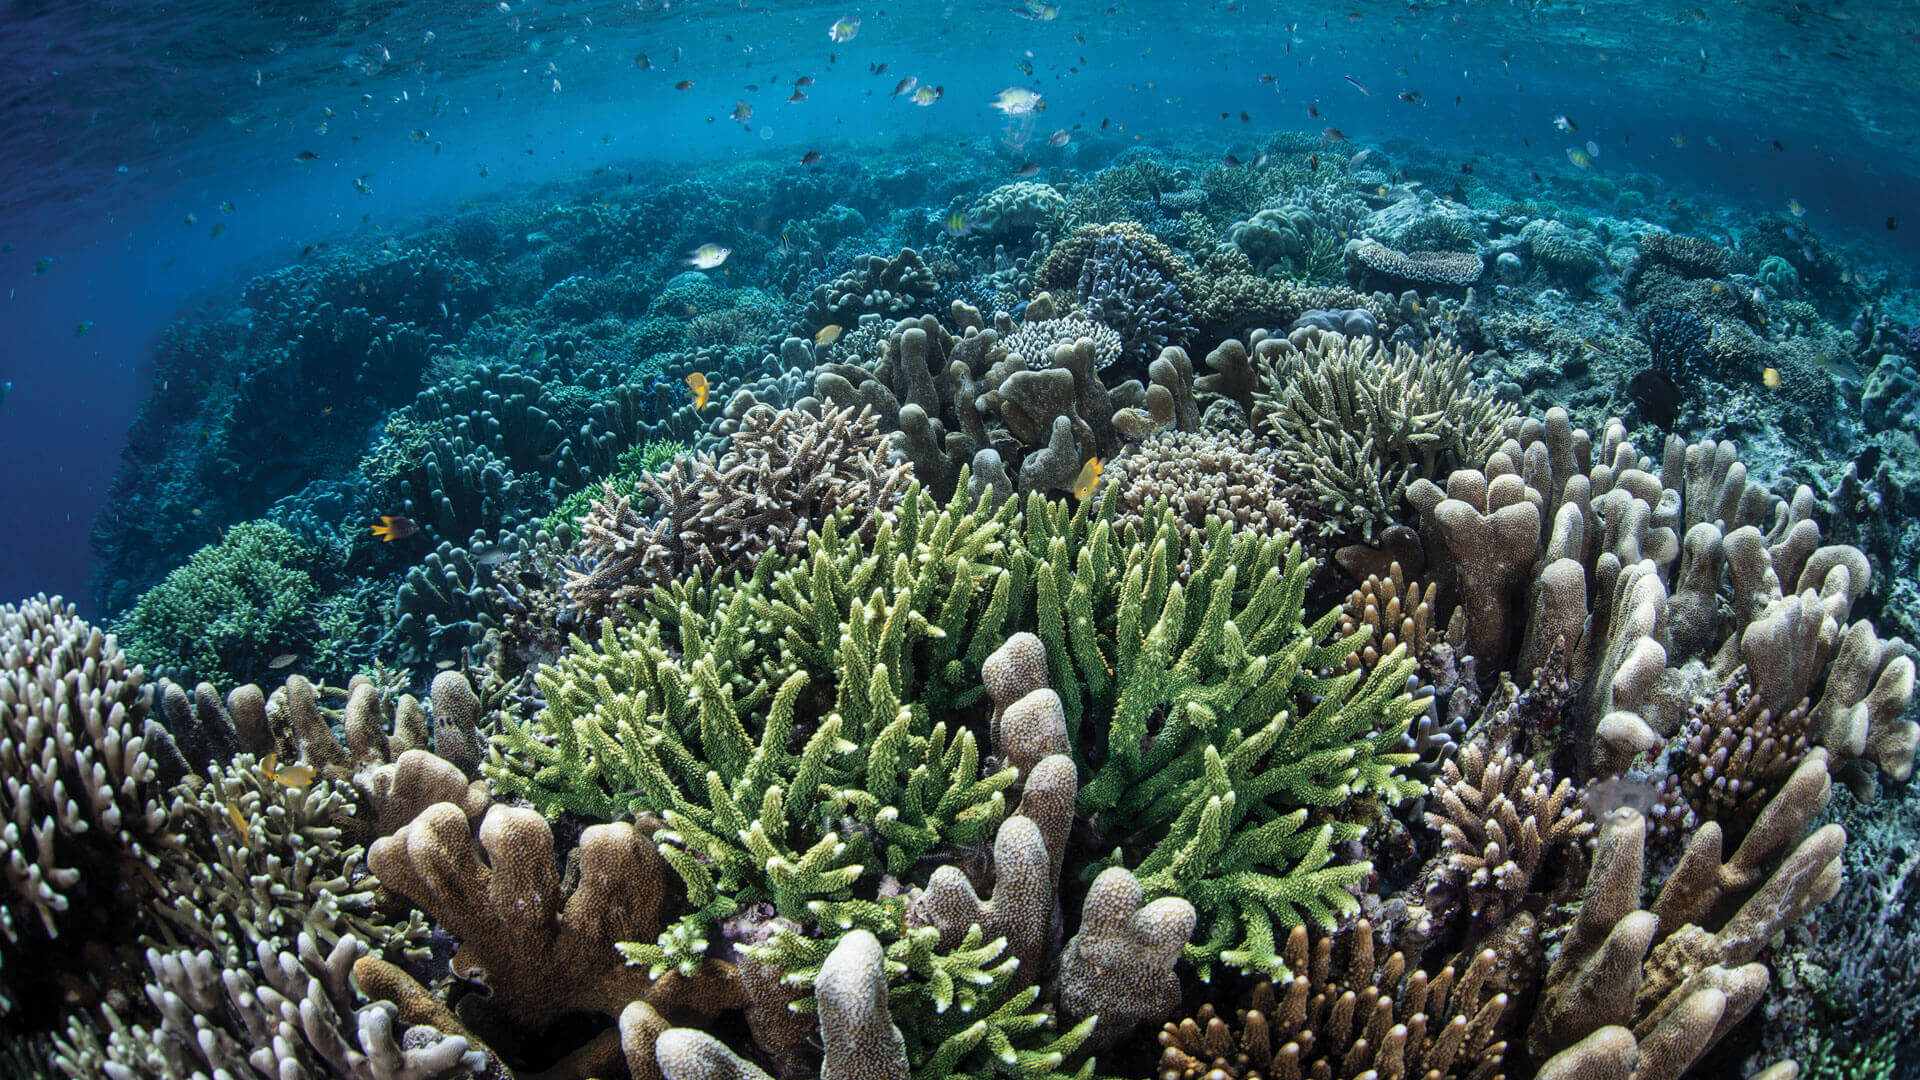 Reef Ecologic | For a better planet